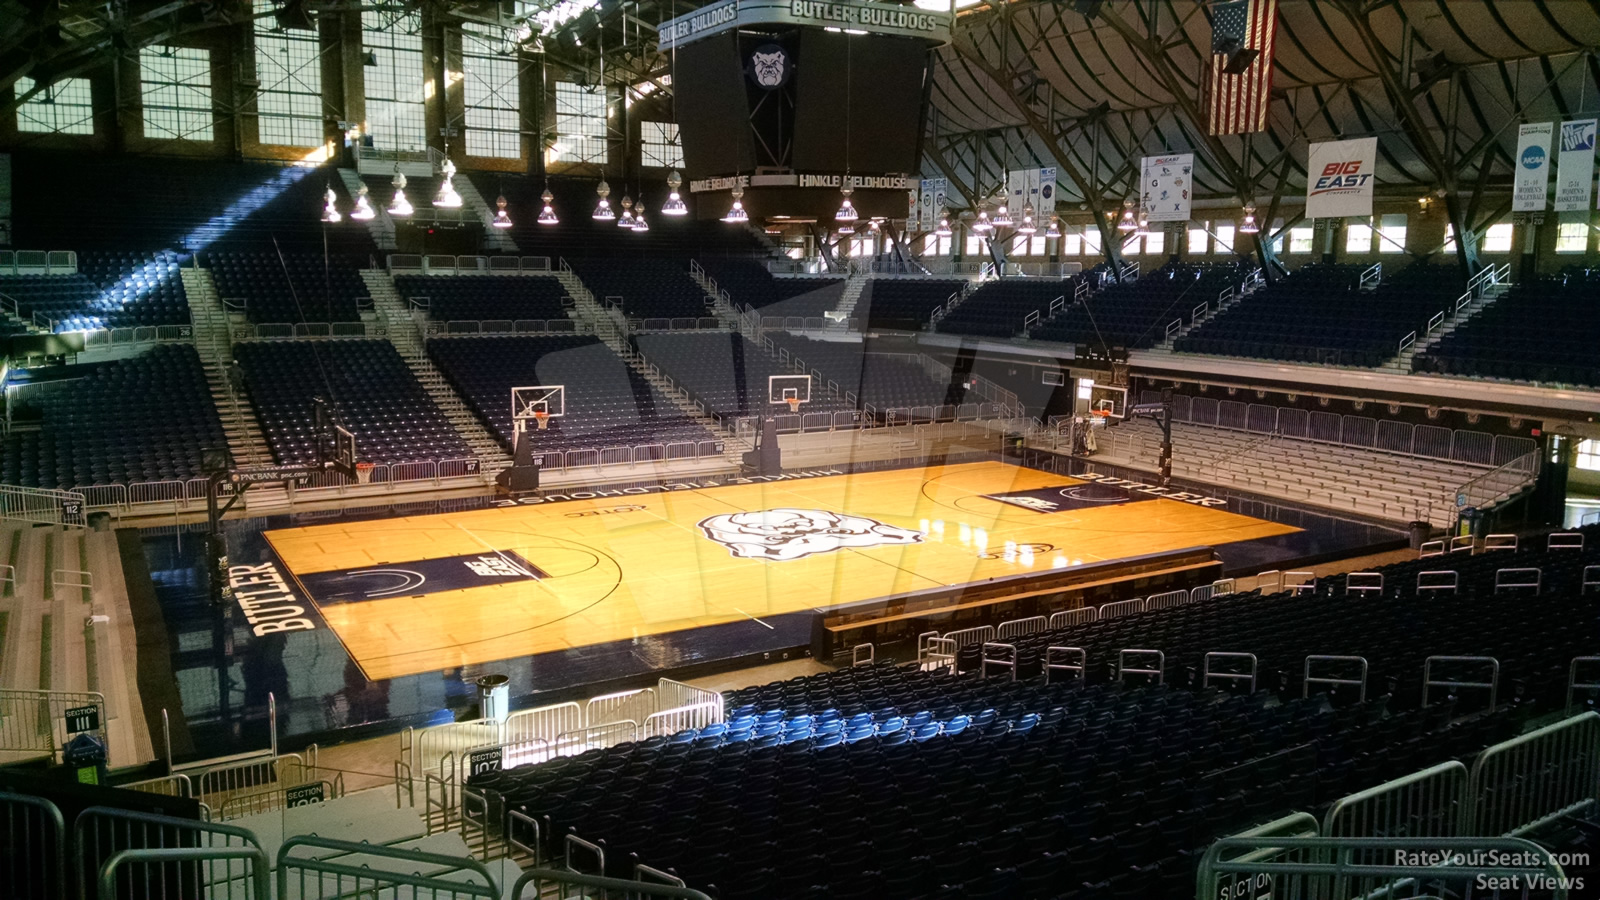 section 208, row 7 seat view  - hinkle fieldhouse